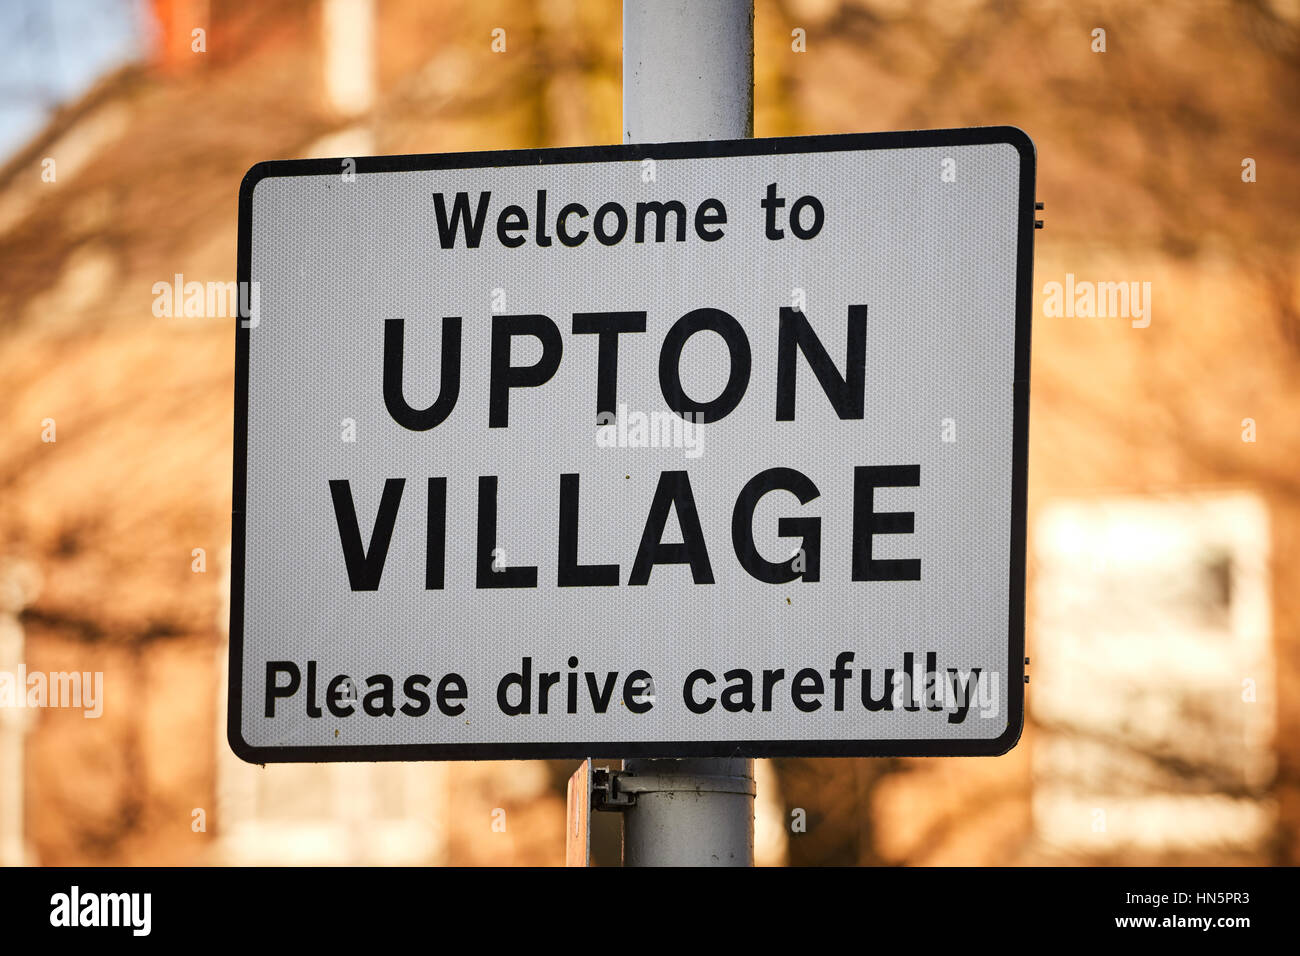 Welcome to Upton Village please drive carefully warning traffic sign in Wallasey, Merseyside, Wirral, England, UK. Stock Photo